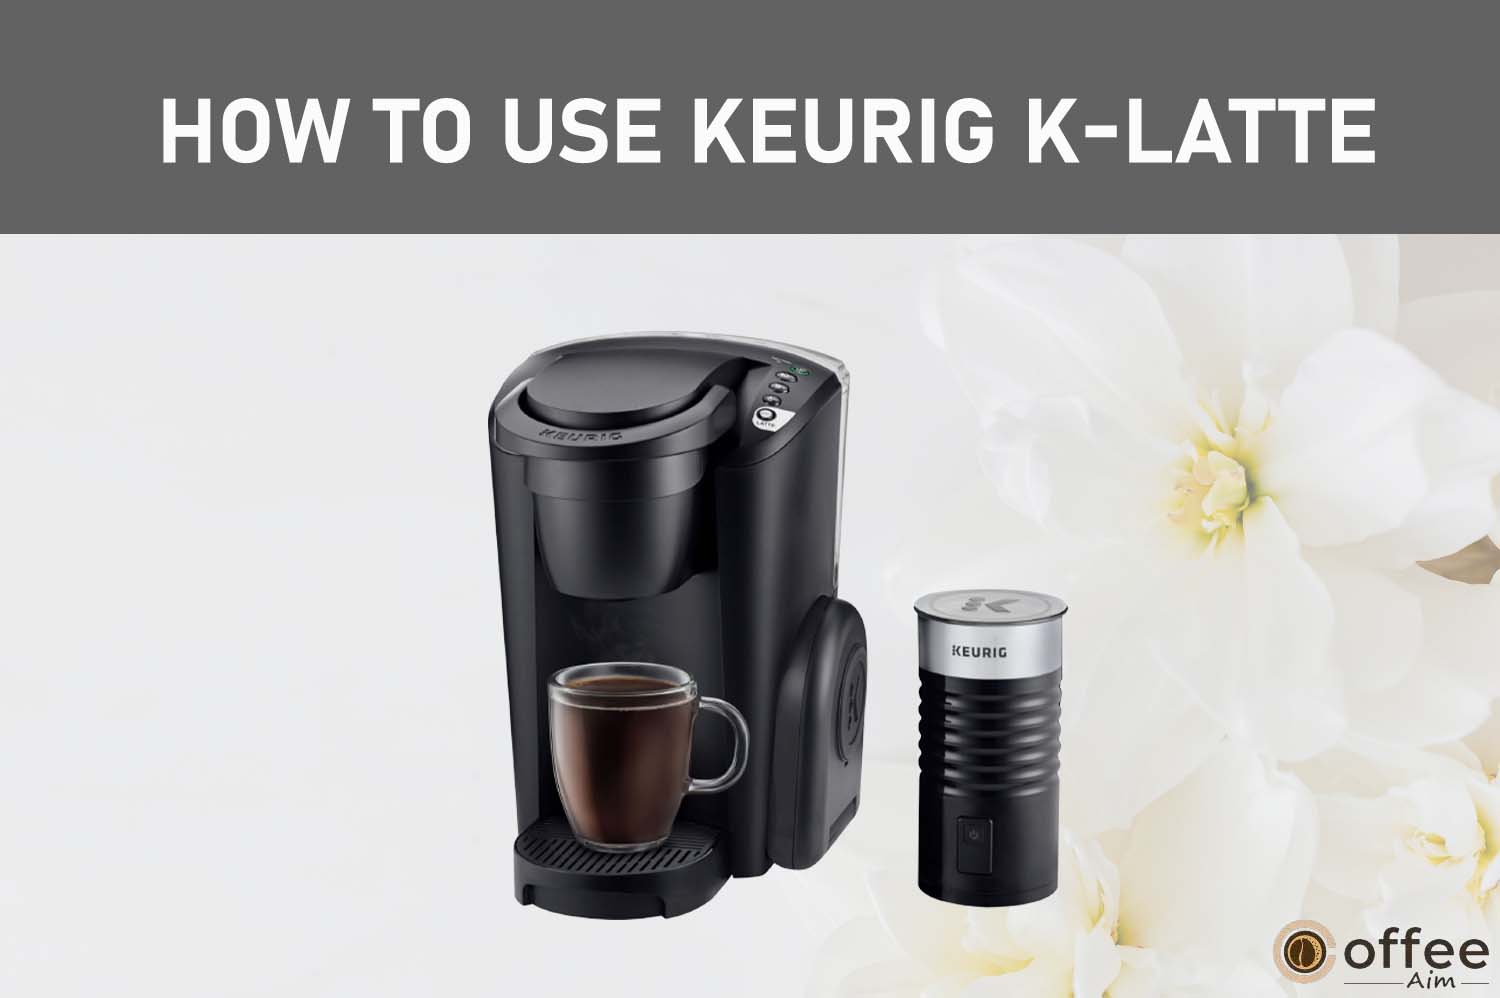 Feature image for the article "How to use Keurig K-Latte"